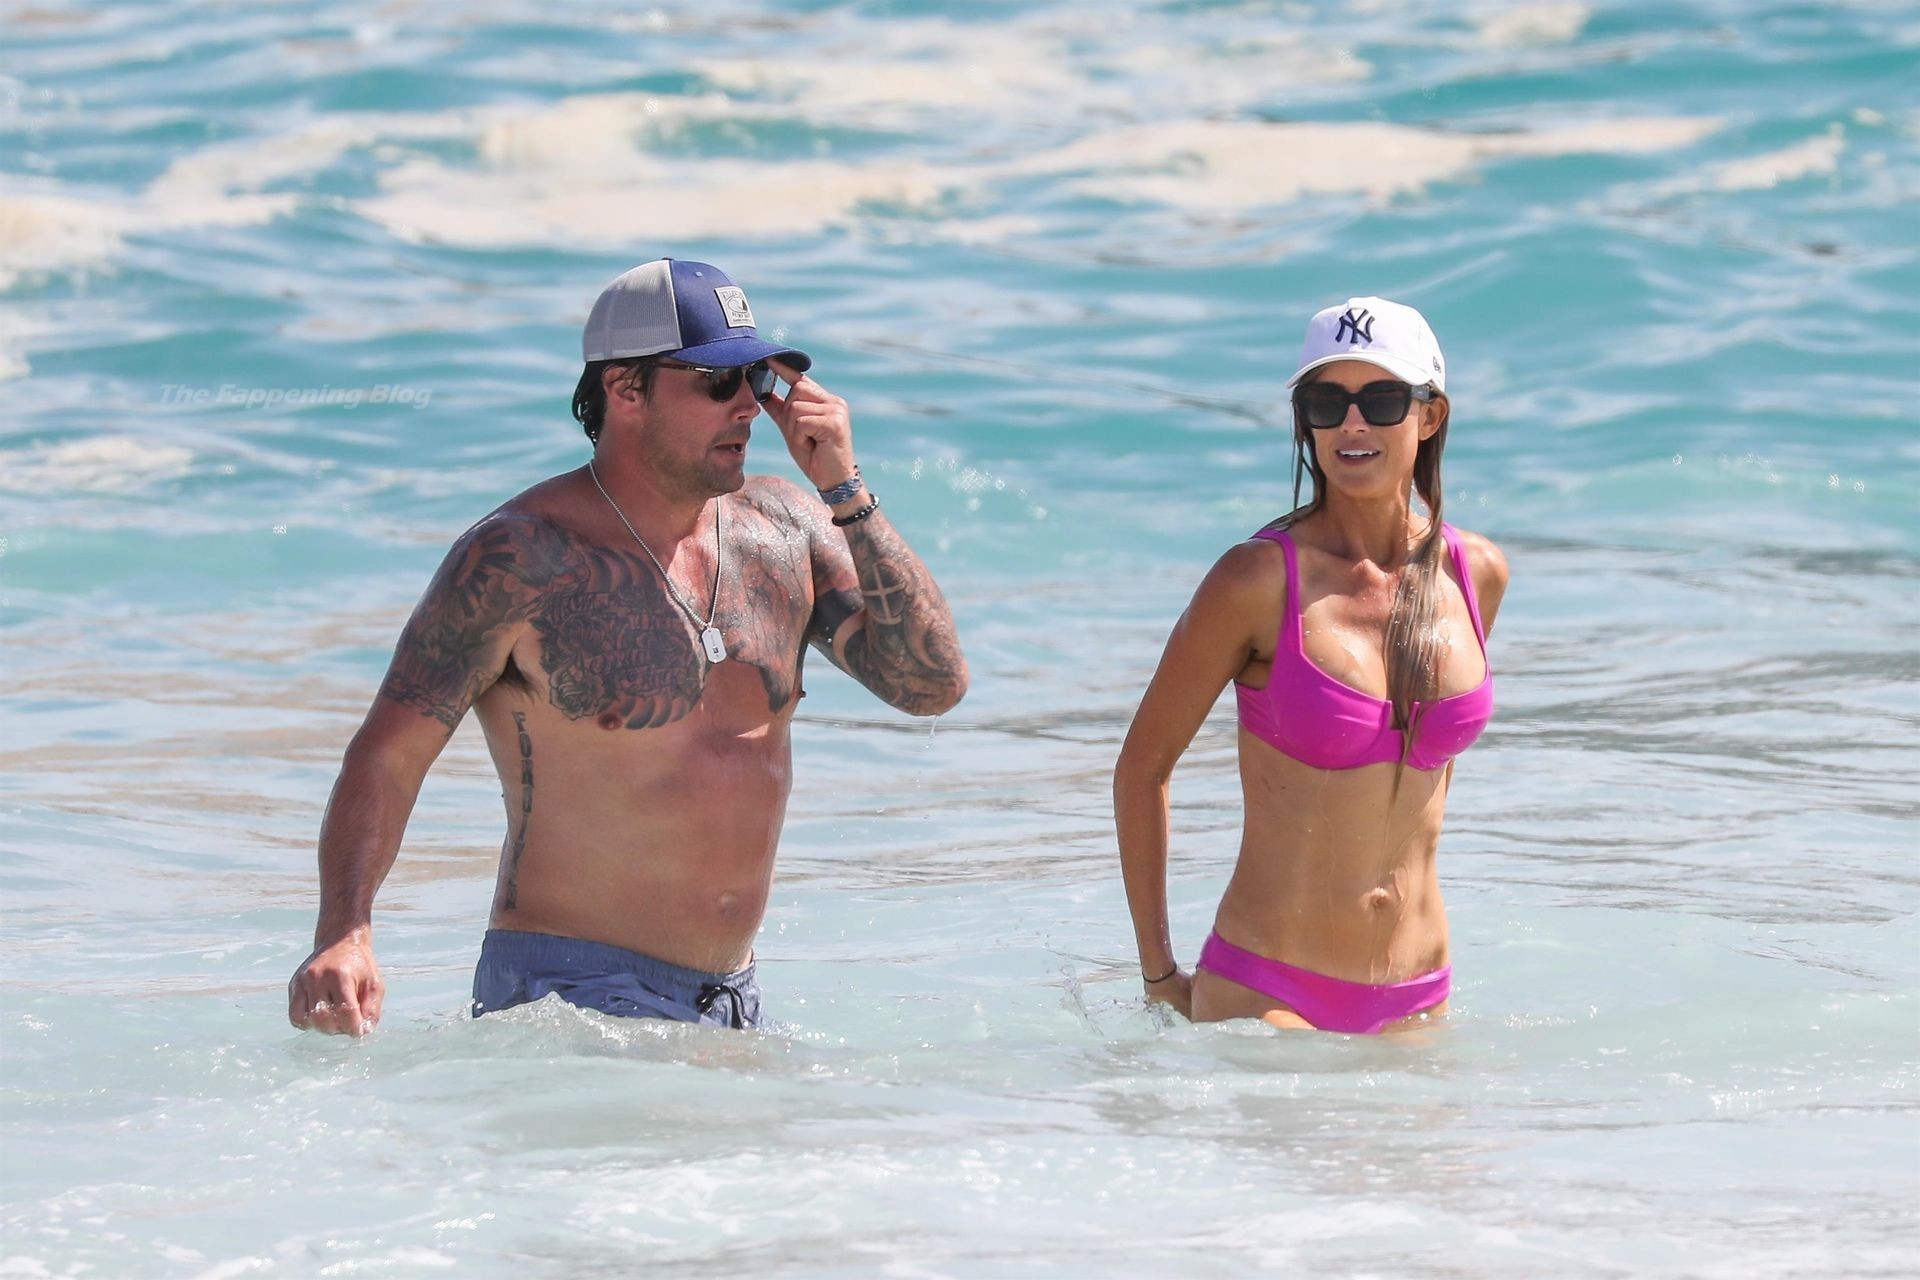 Christina Haack Looks Hot in a Pink Bikini on the Beach in Cabo (
48 Photos)